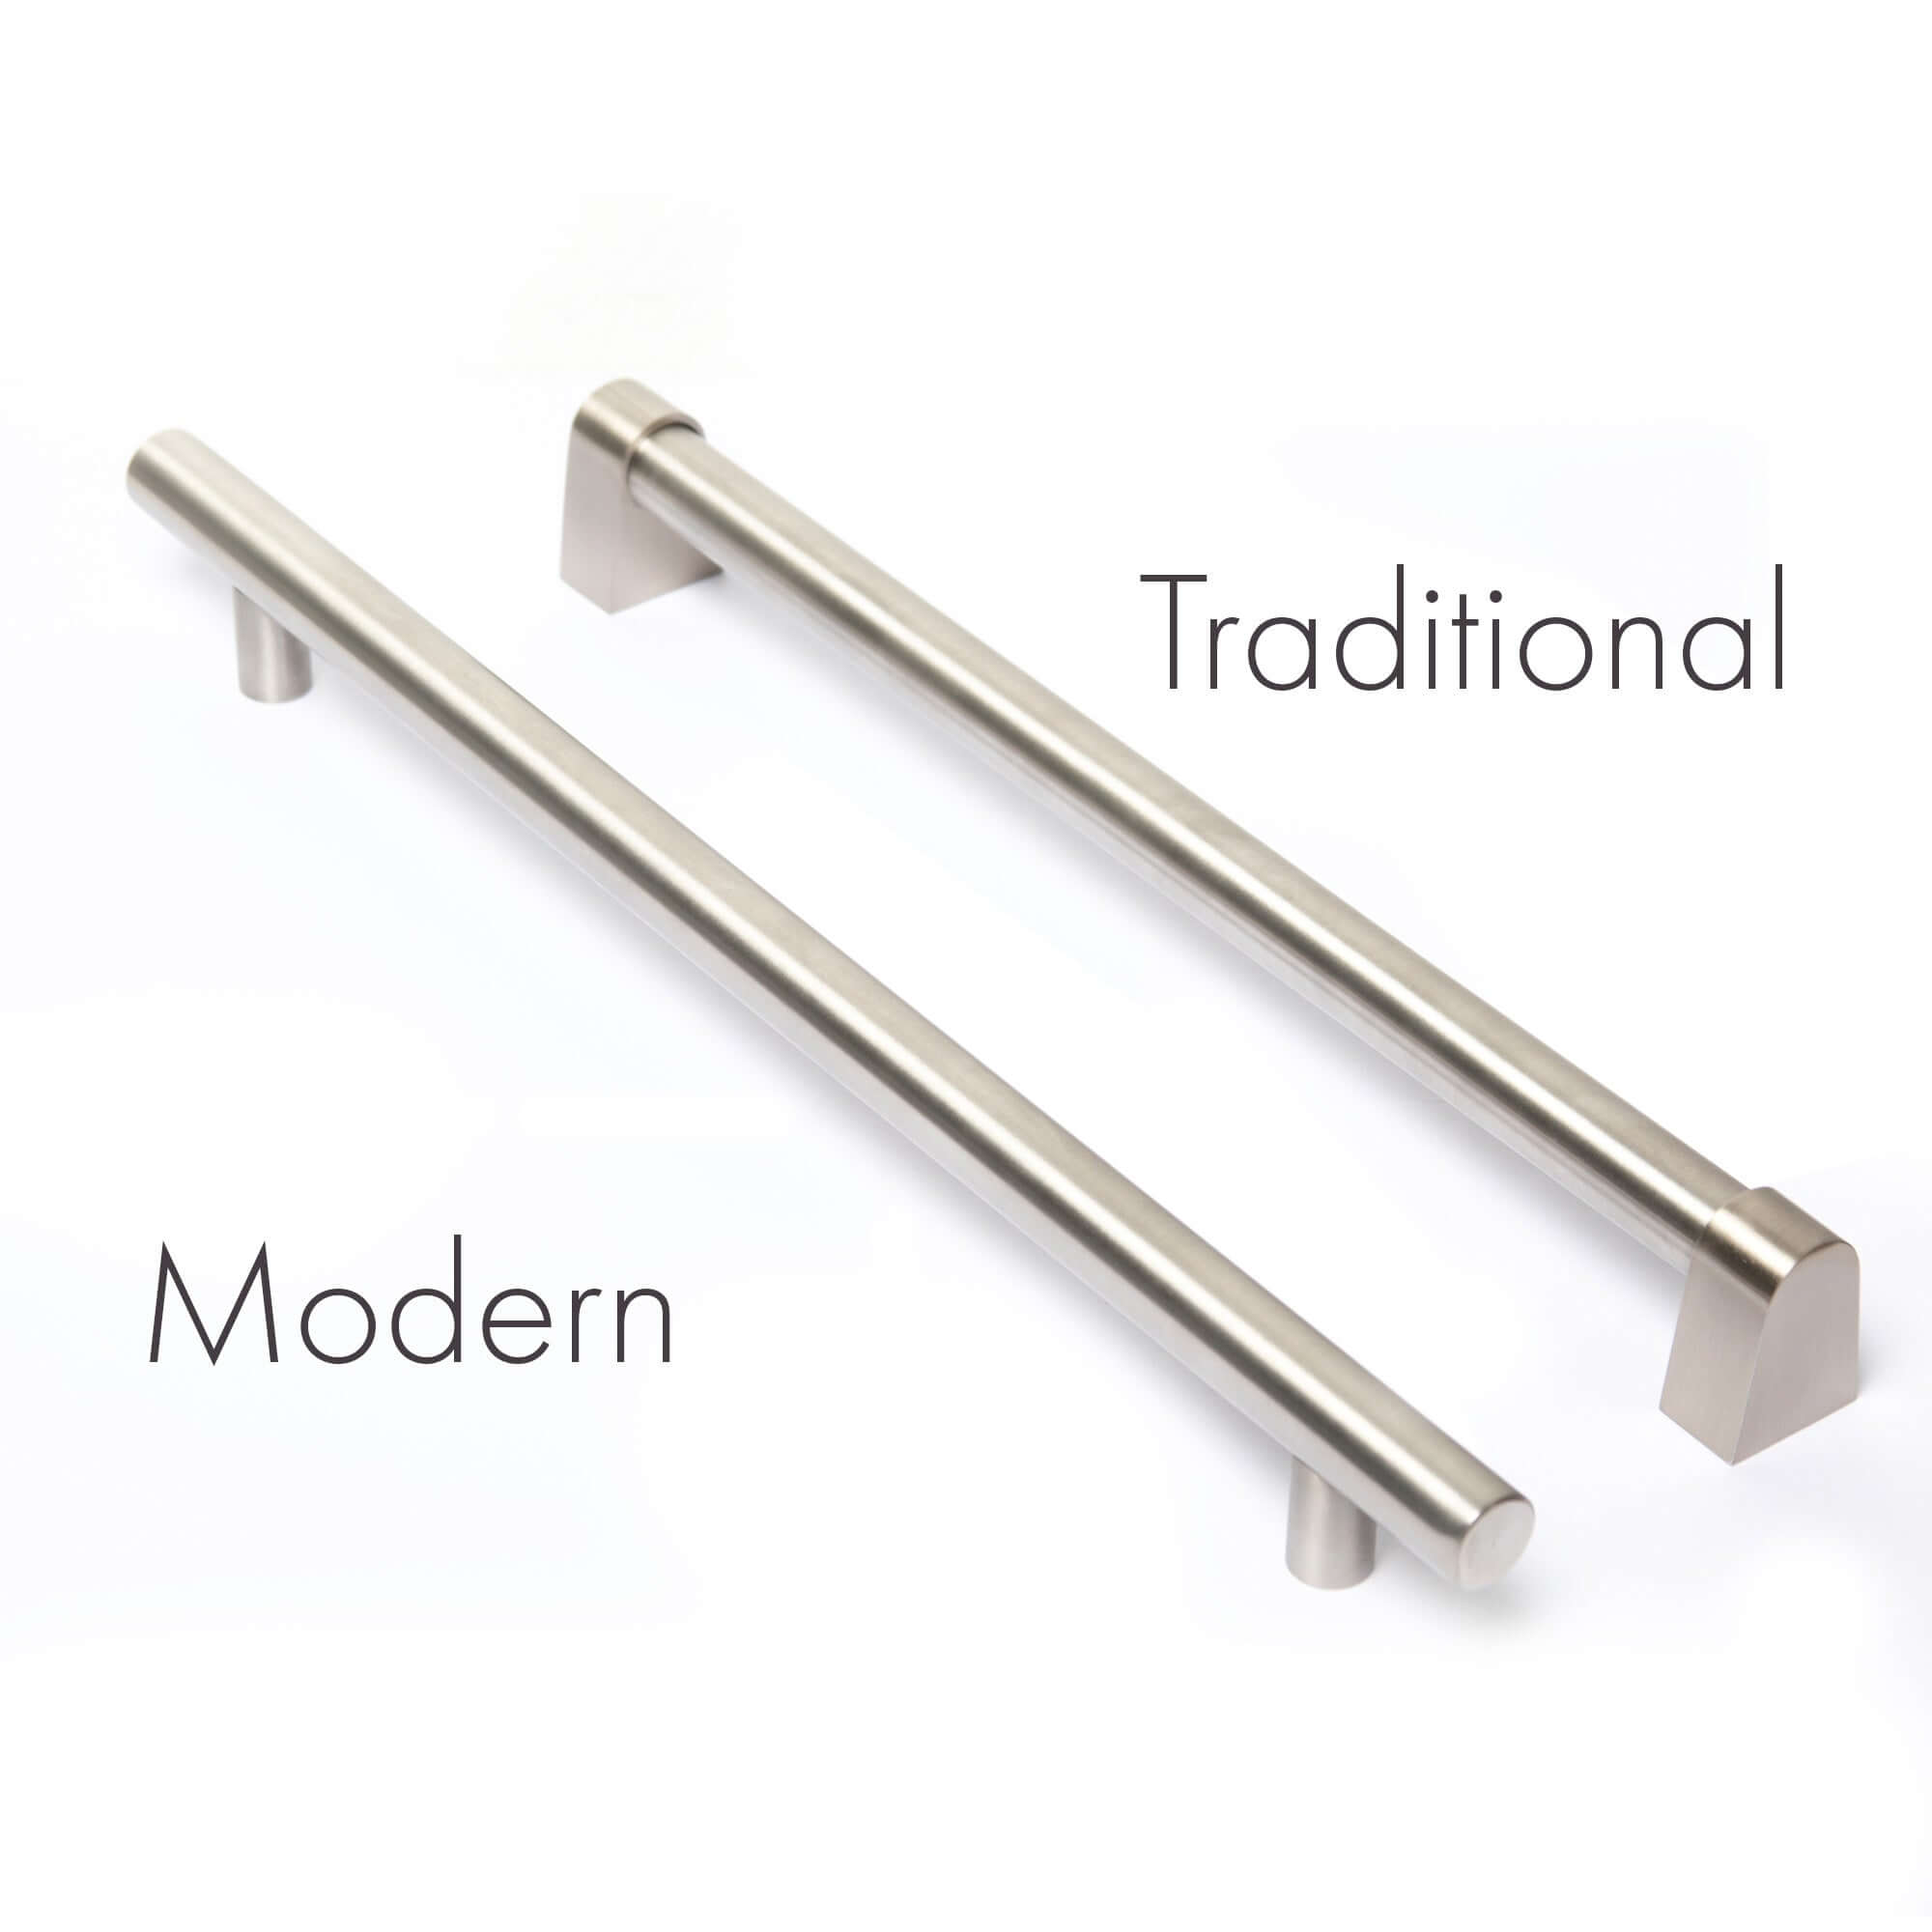 Modern and traditional dishwasher handles compared.